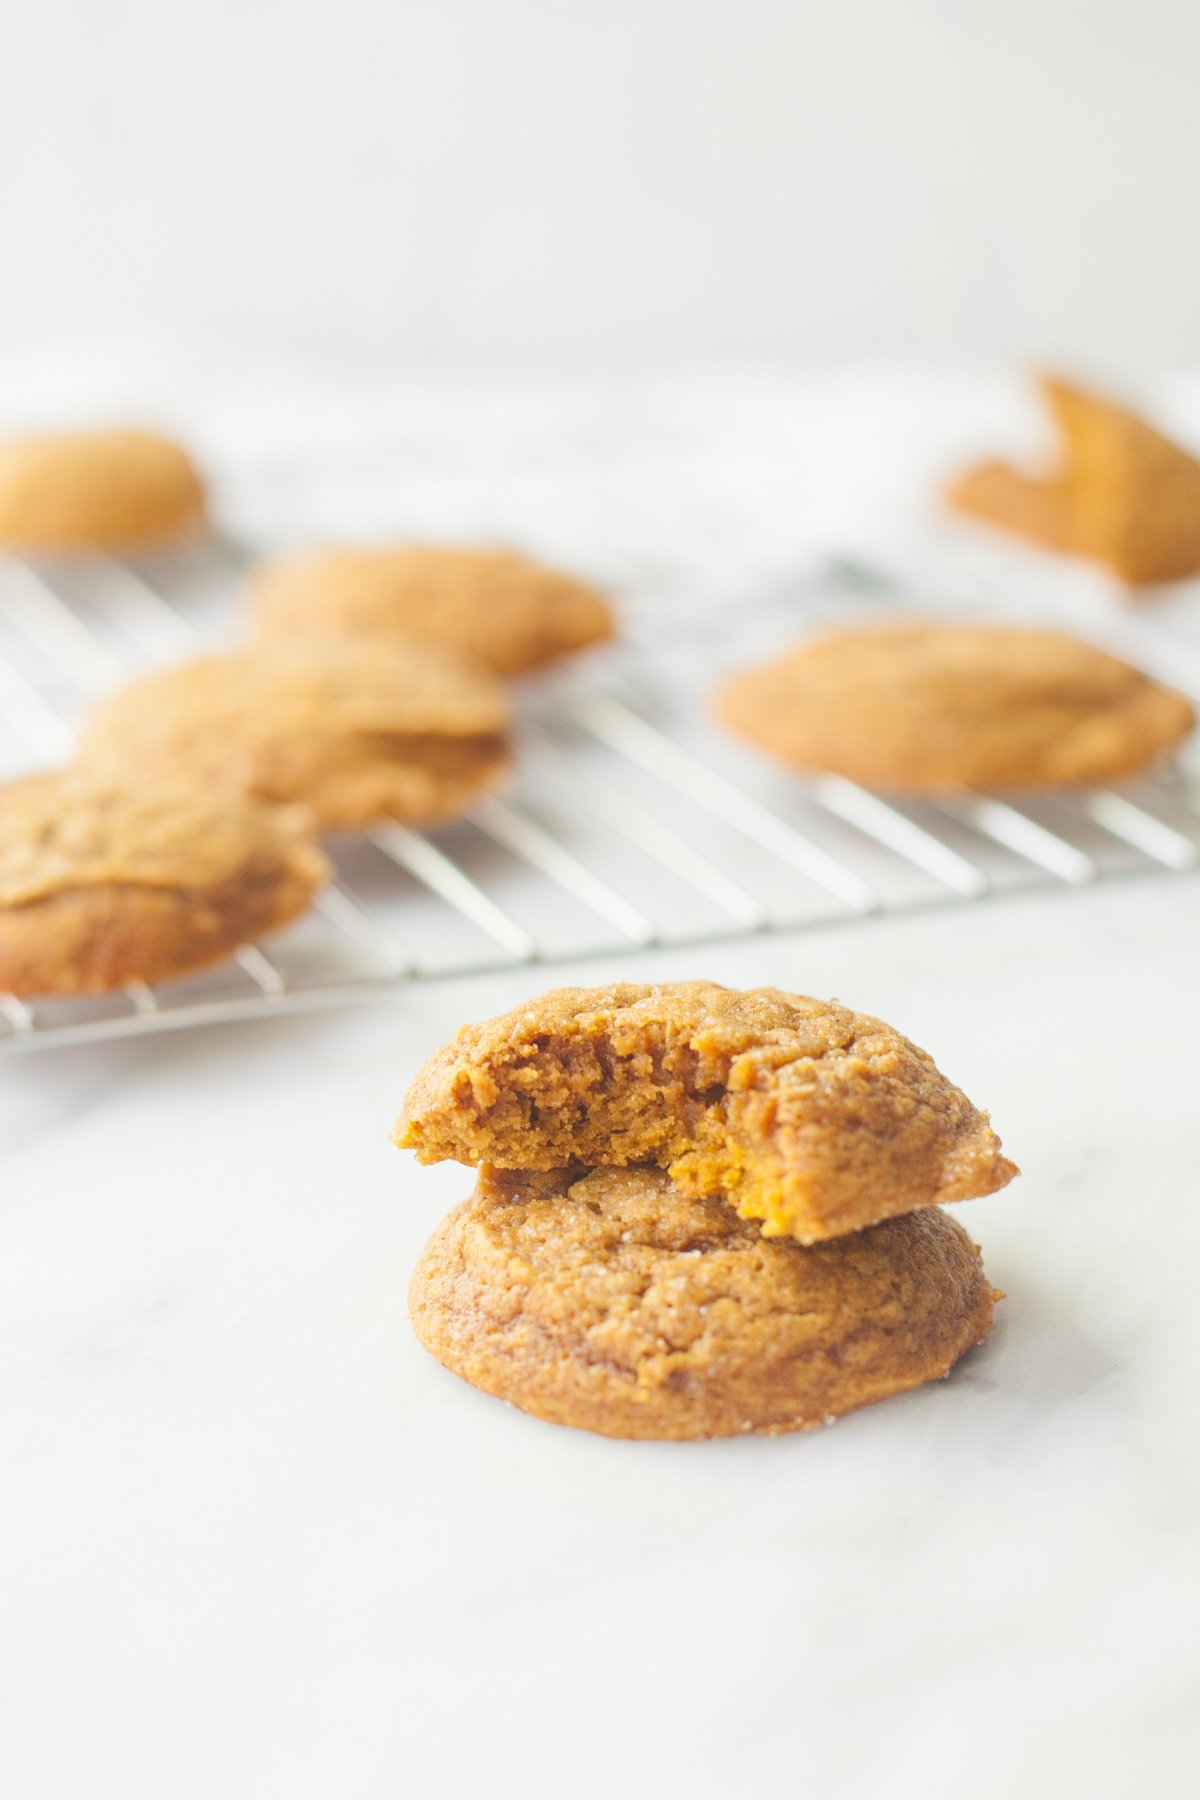 Small Batch Chewy Pumpkin Spice Cookies